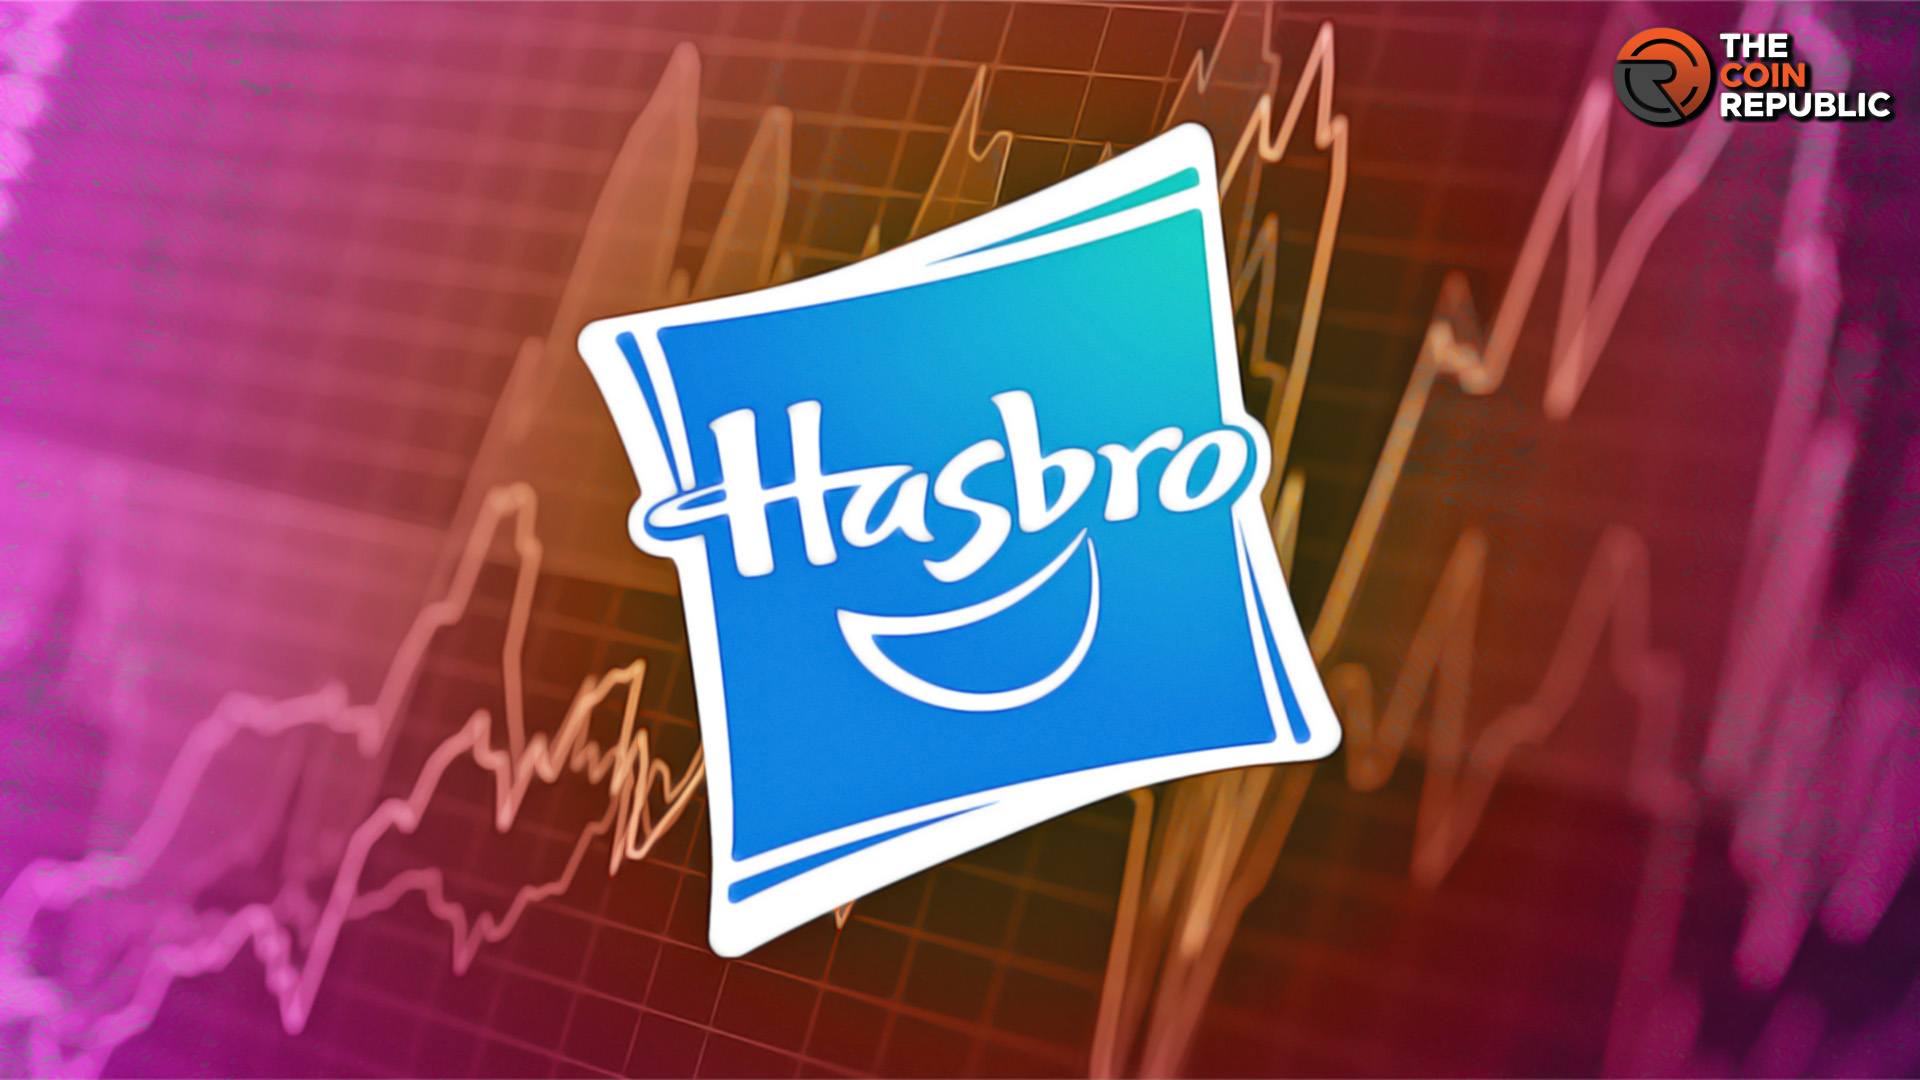 Is Hasbro Stock Price Ready to Uptrend Hoping Positive Earnings?